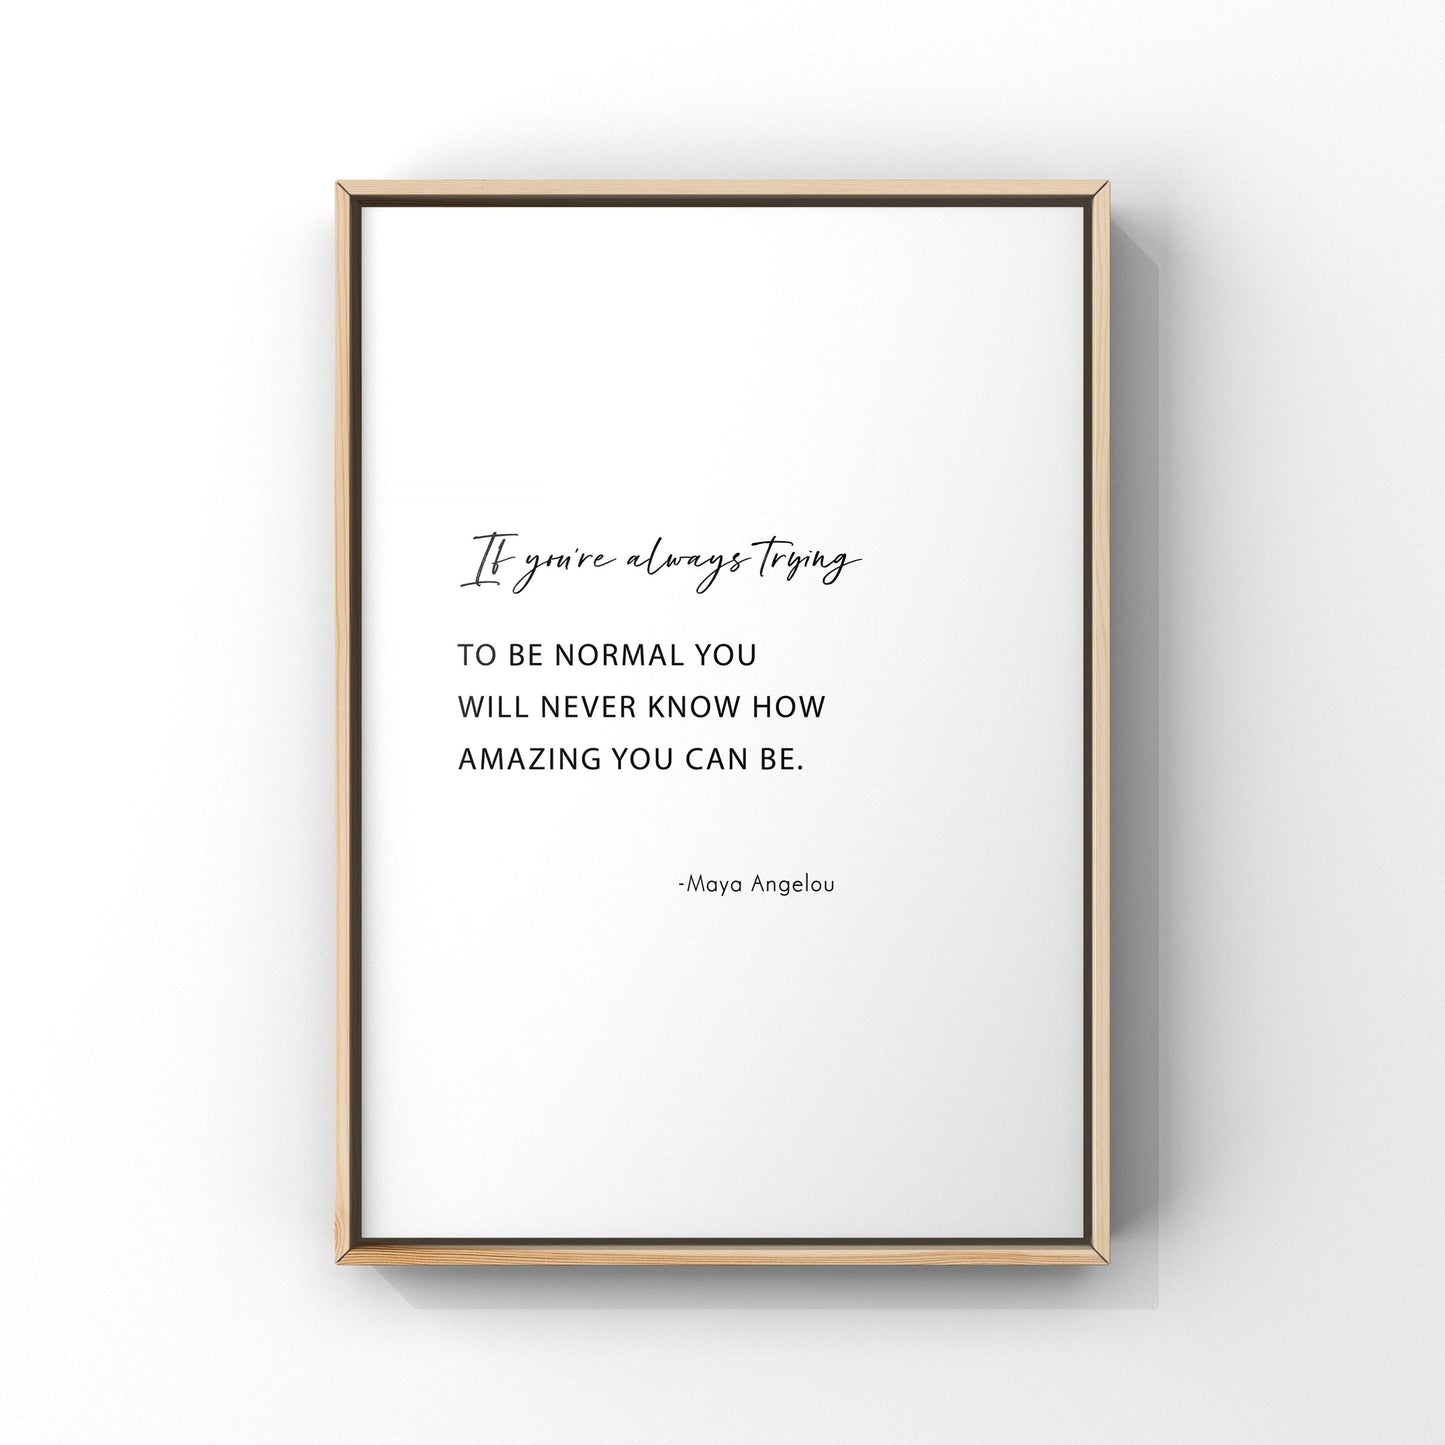 If you’re always trying to be normal,Maya Angelou quotes,Inspirational print,Wall decor,Maya Angelou print,Birthday gift,Motivational,Office